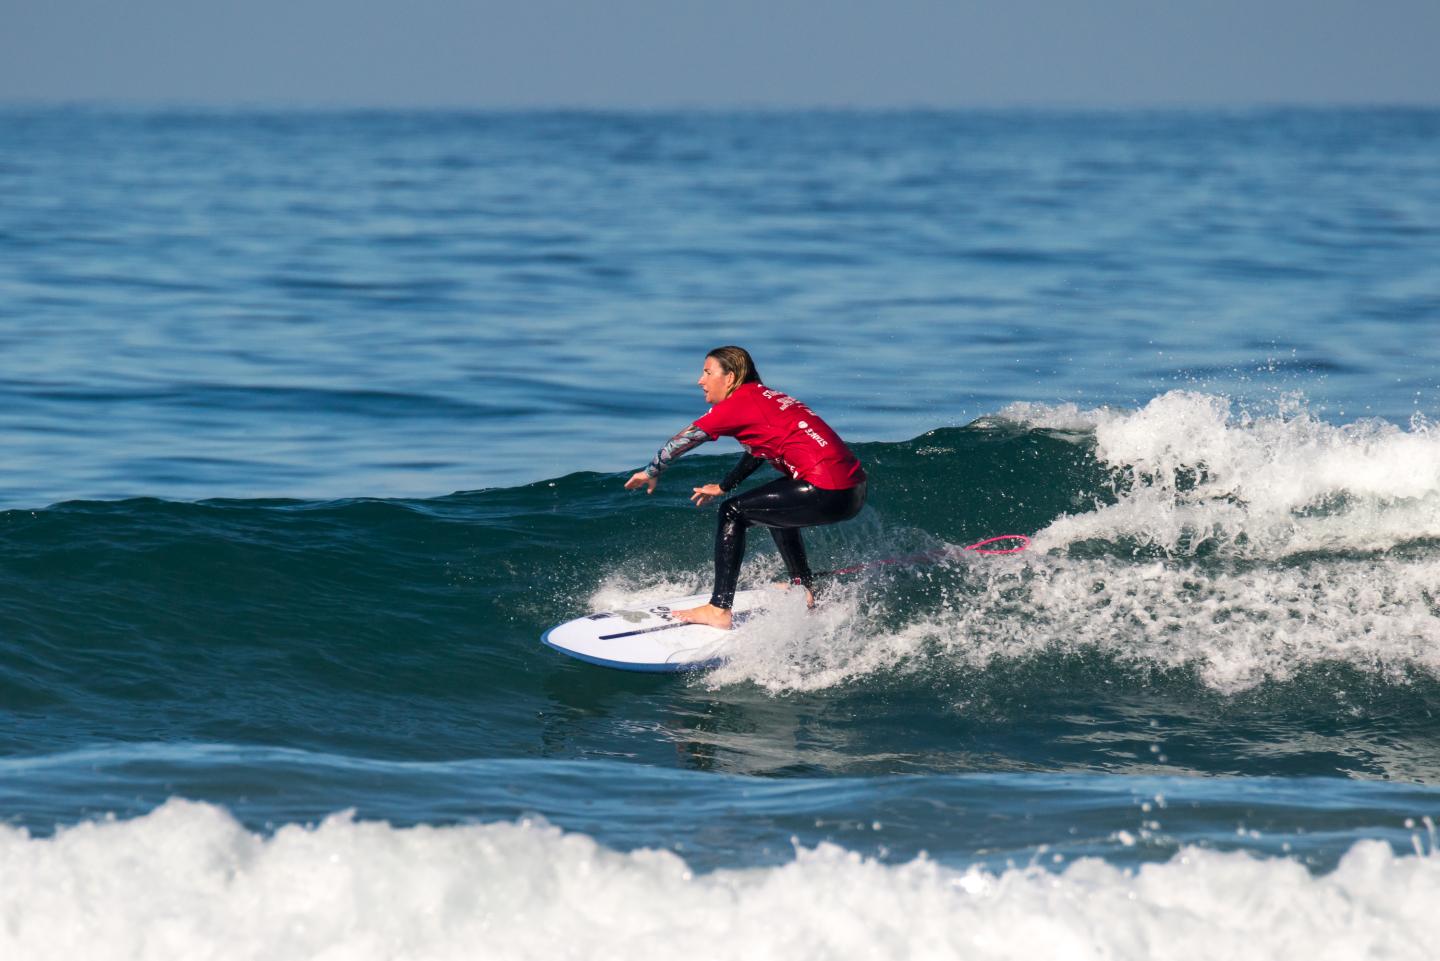 Surfer Melissa Reid competing in the ISA World Para Surfing Championships in California